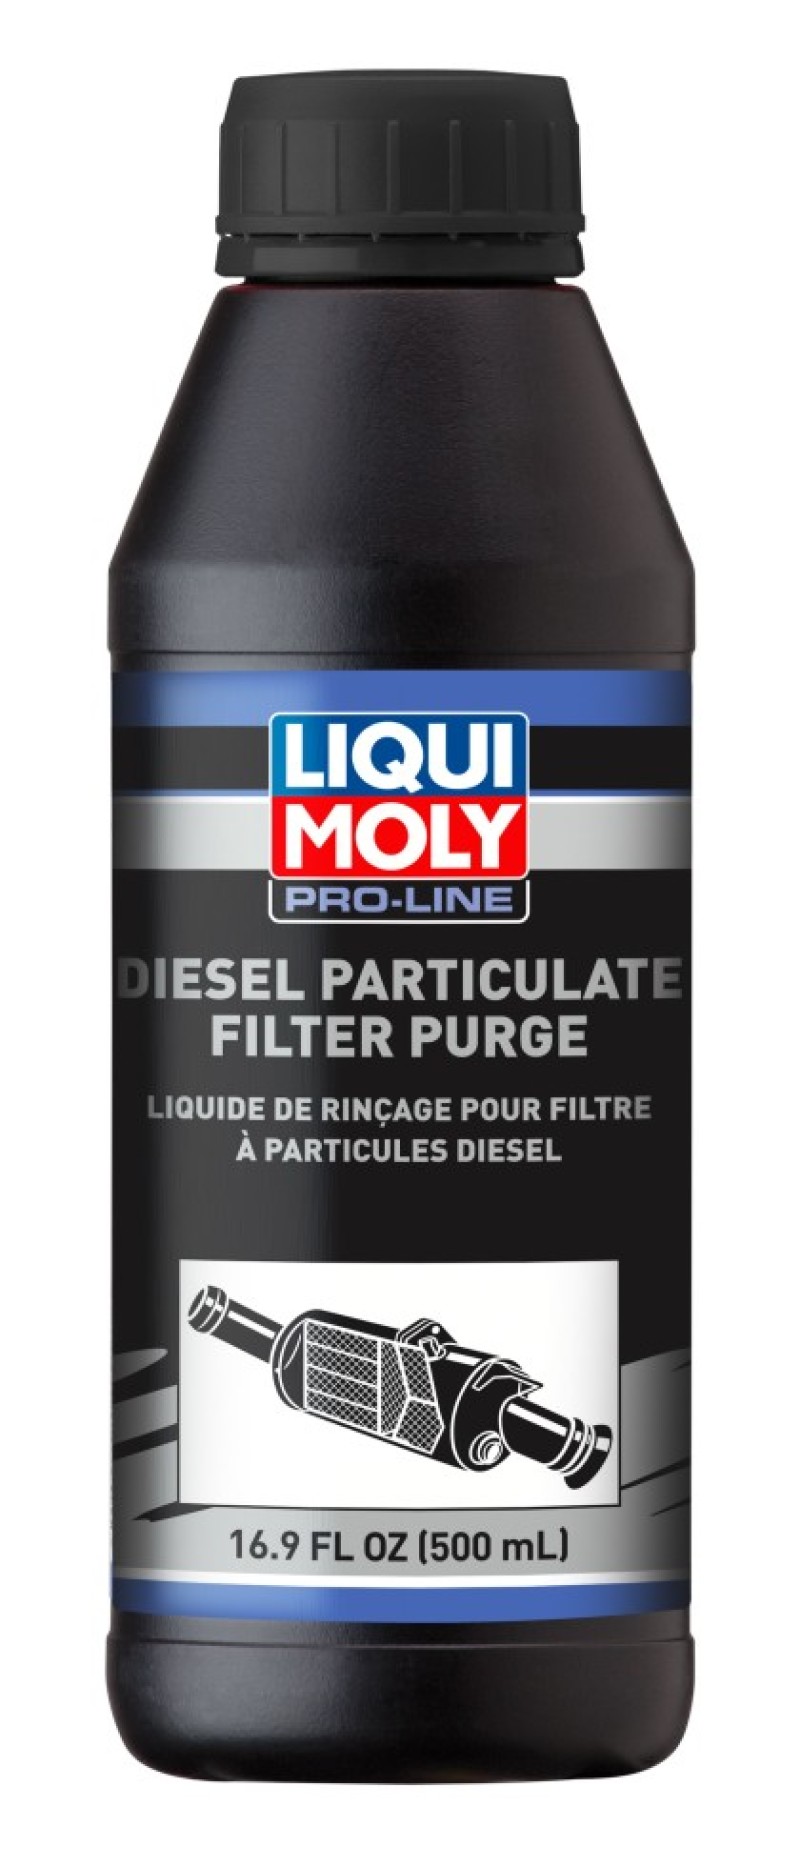 LIQUI MOLY 500mL Pro-Line Diesel Particulate Filter Purge - Single - 20112-1